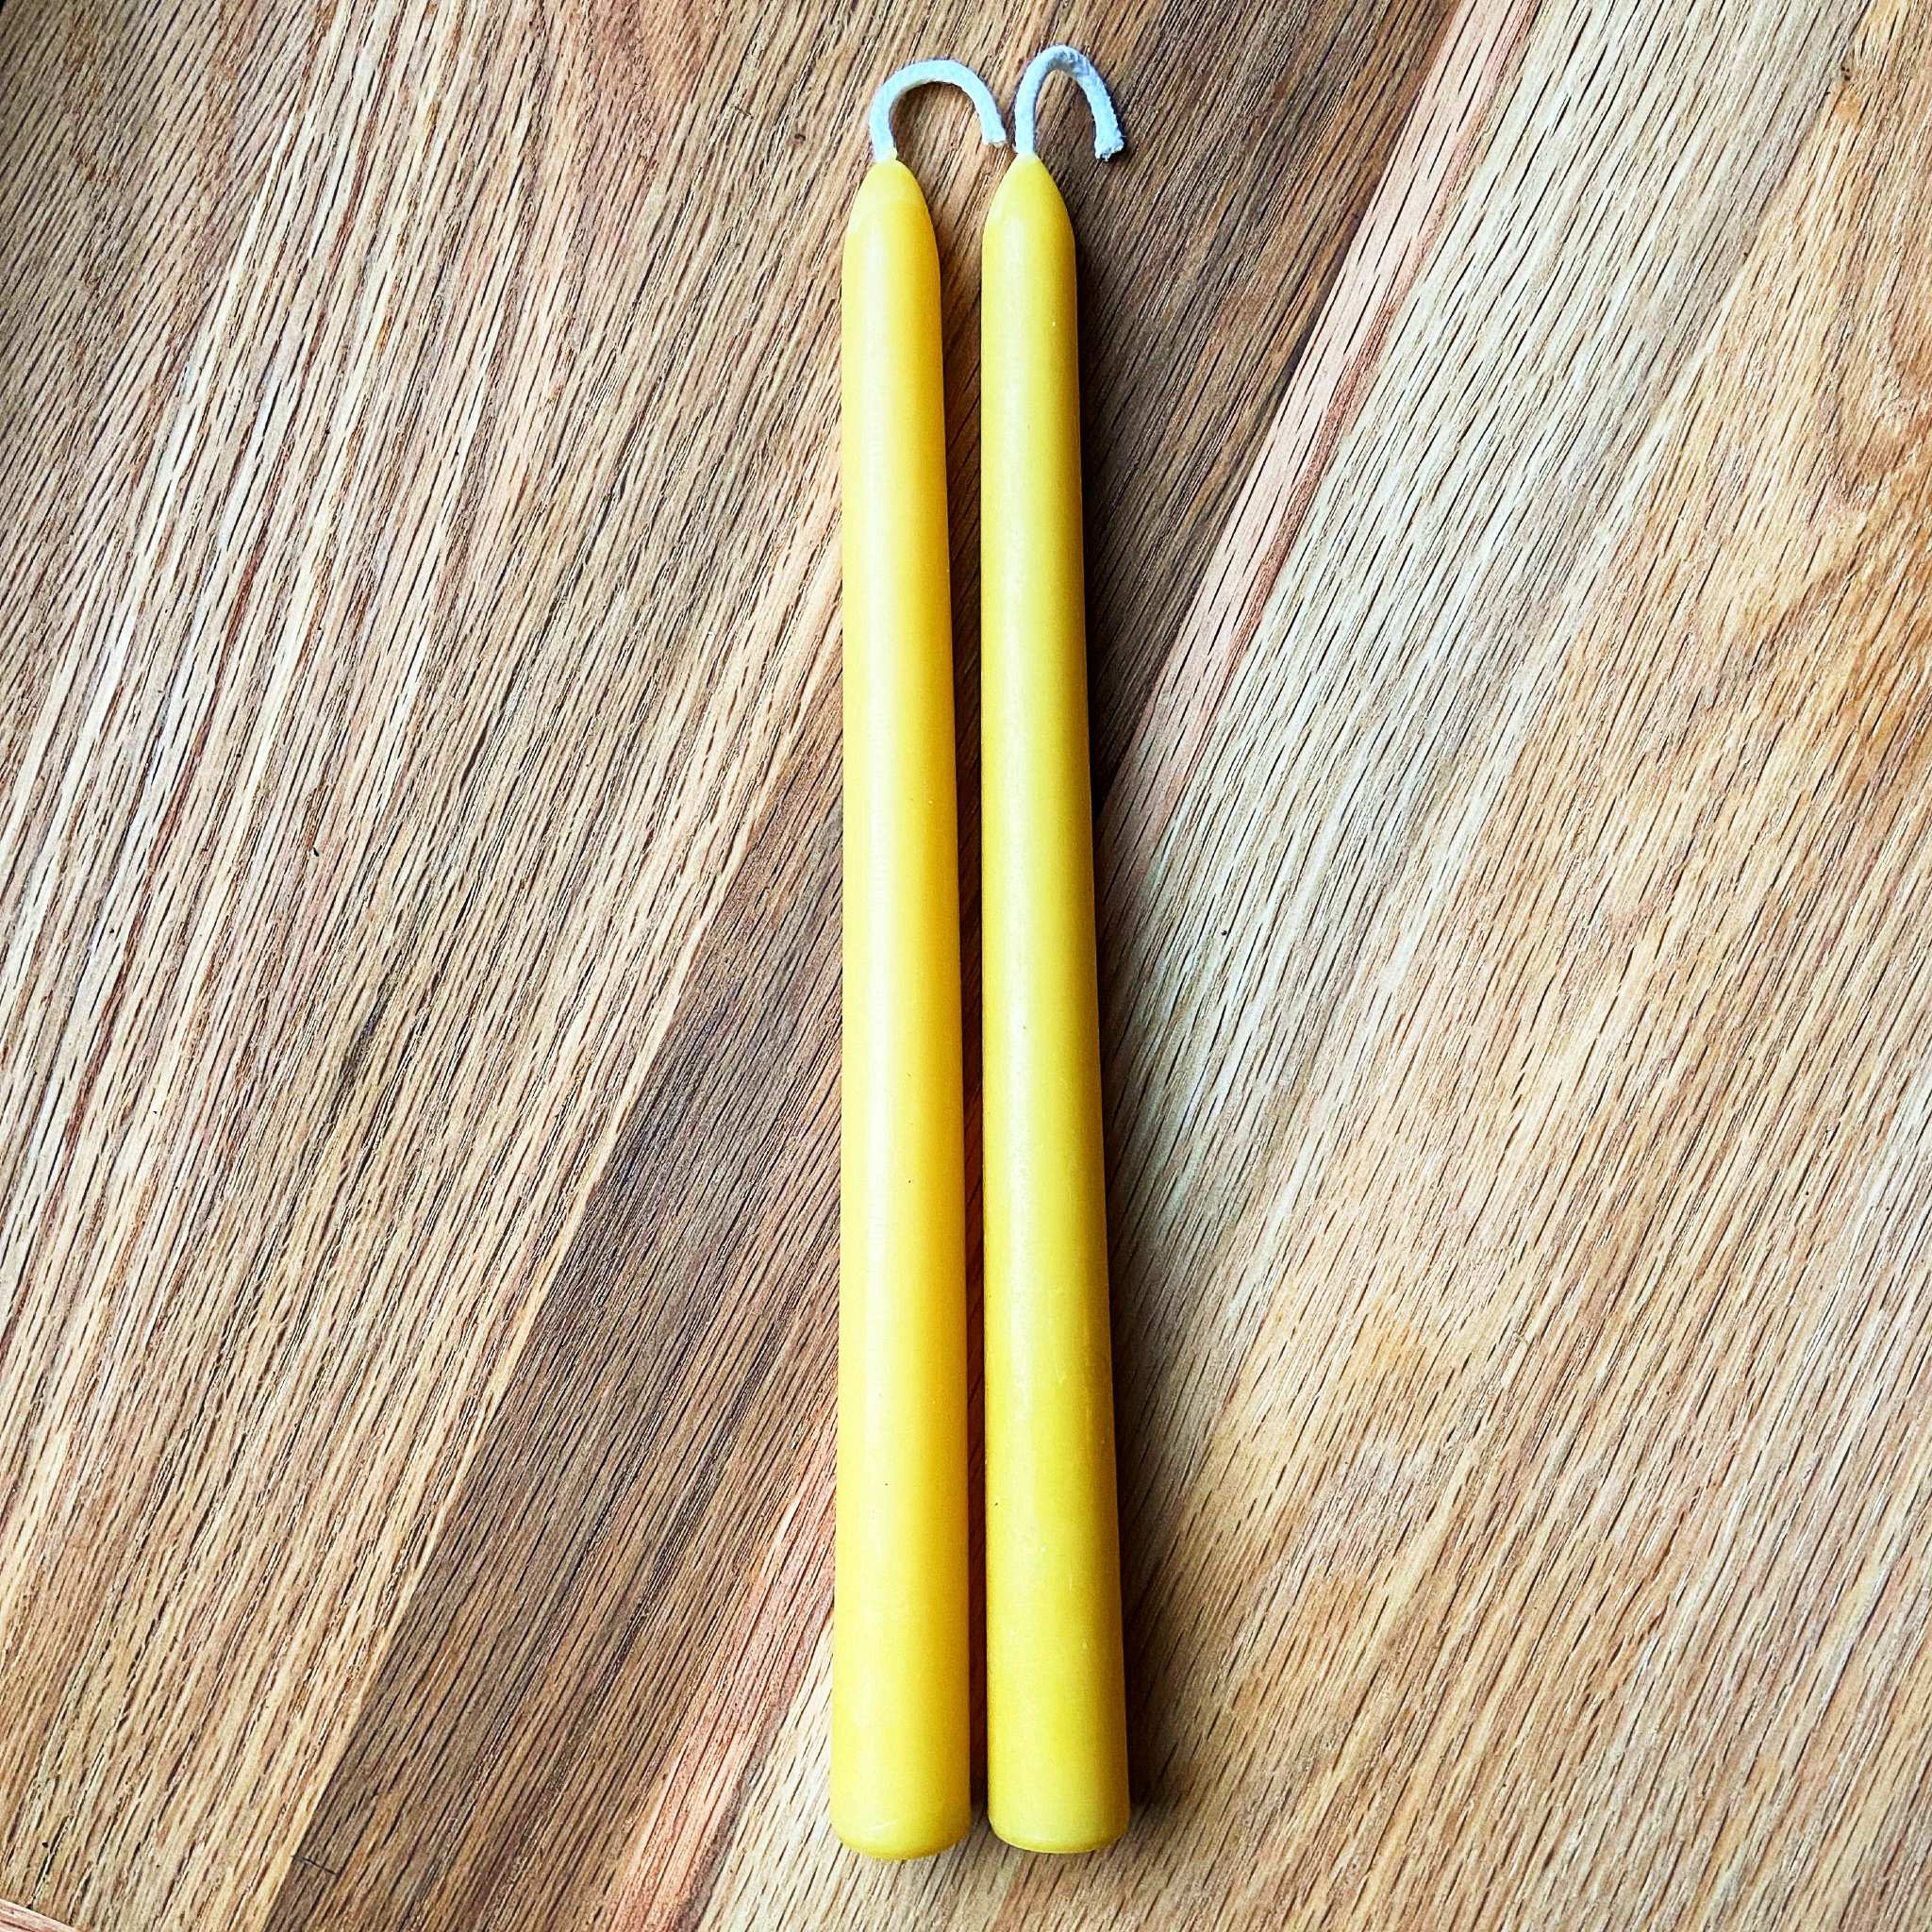 10" pure beeswax candles from Mill Creek Apiary